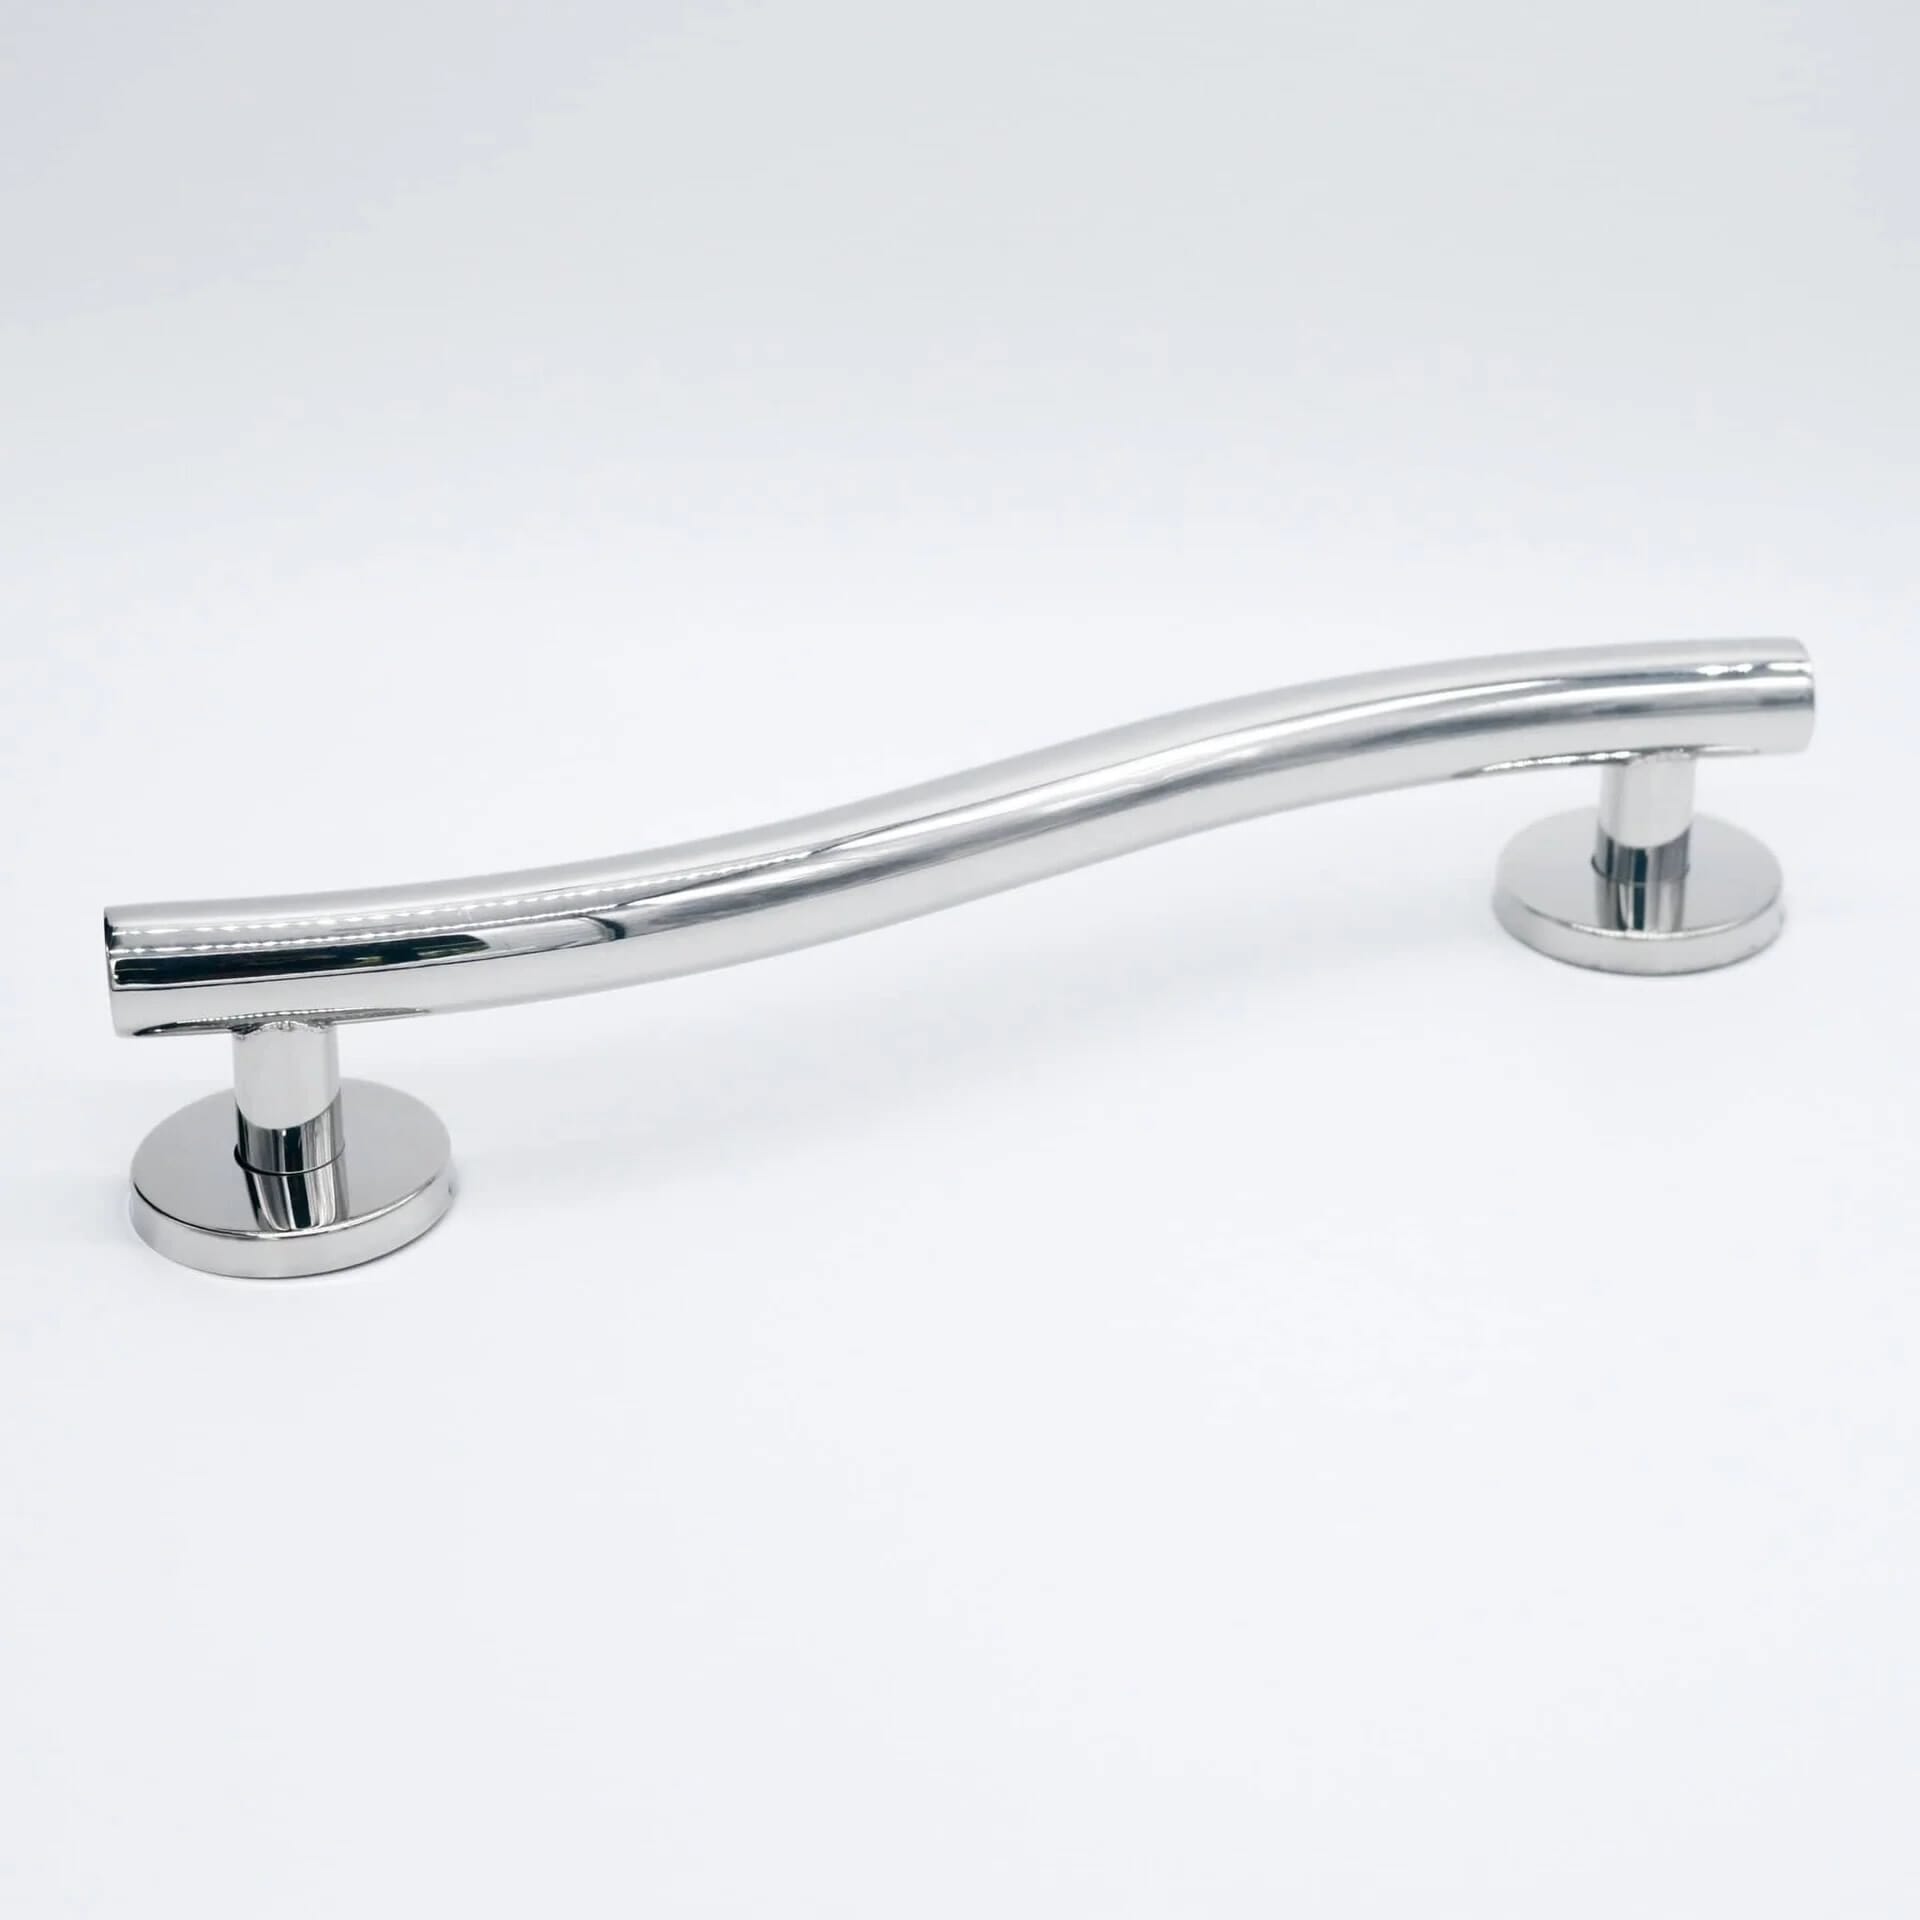 View Spa Stainless Steel Curved Grab Rail 18 inch information